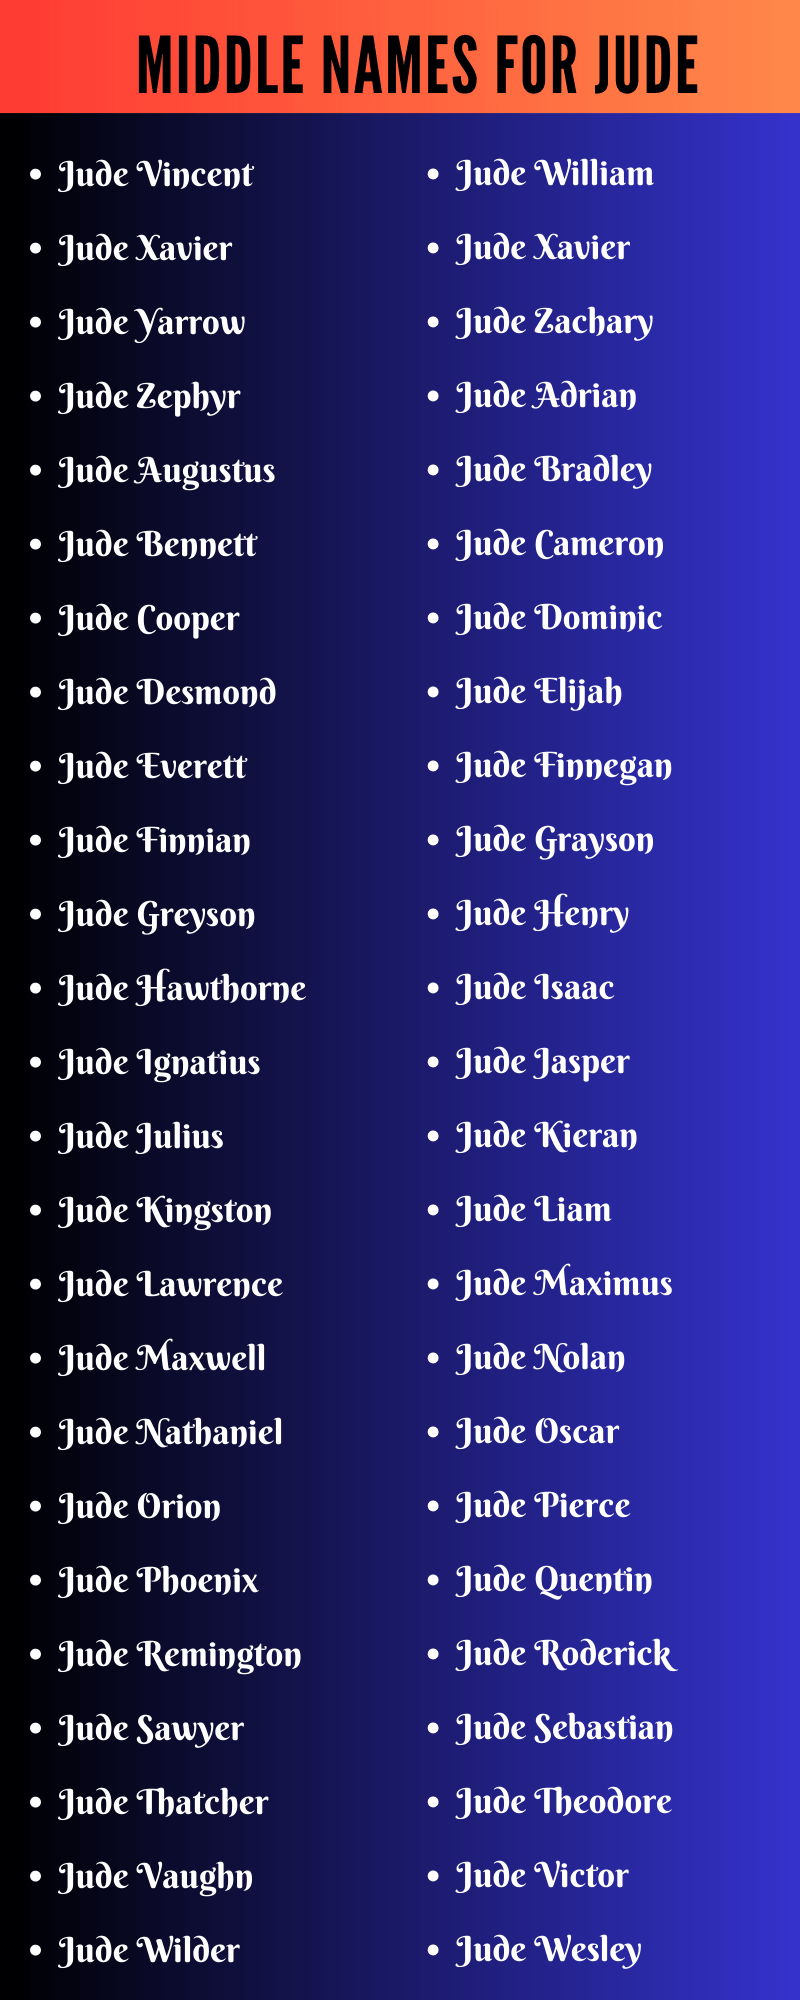 Middle Names For Jude